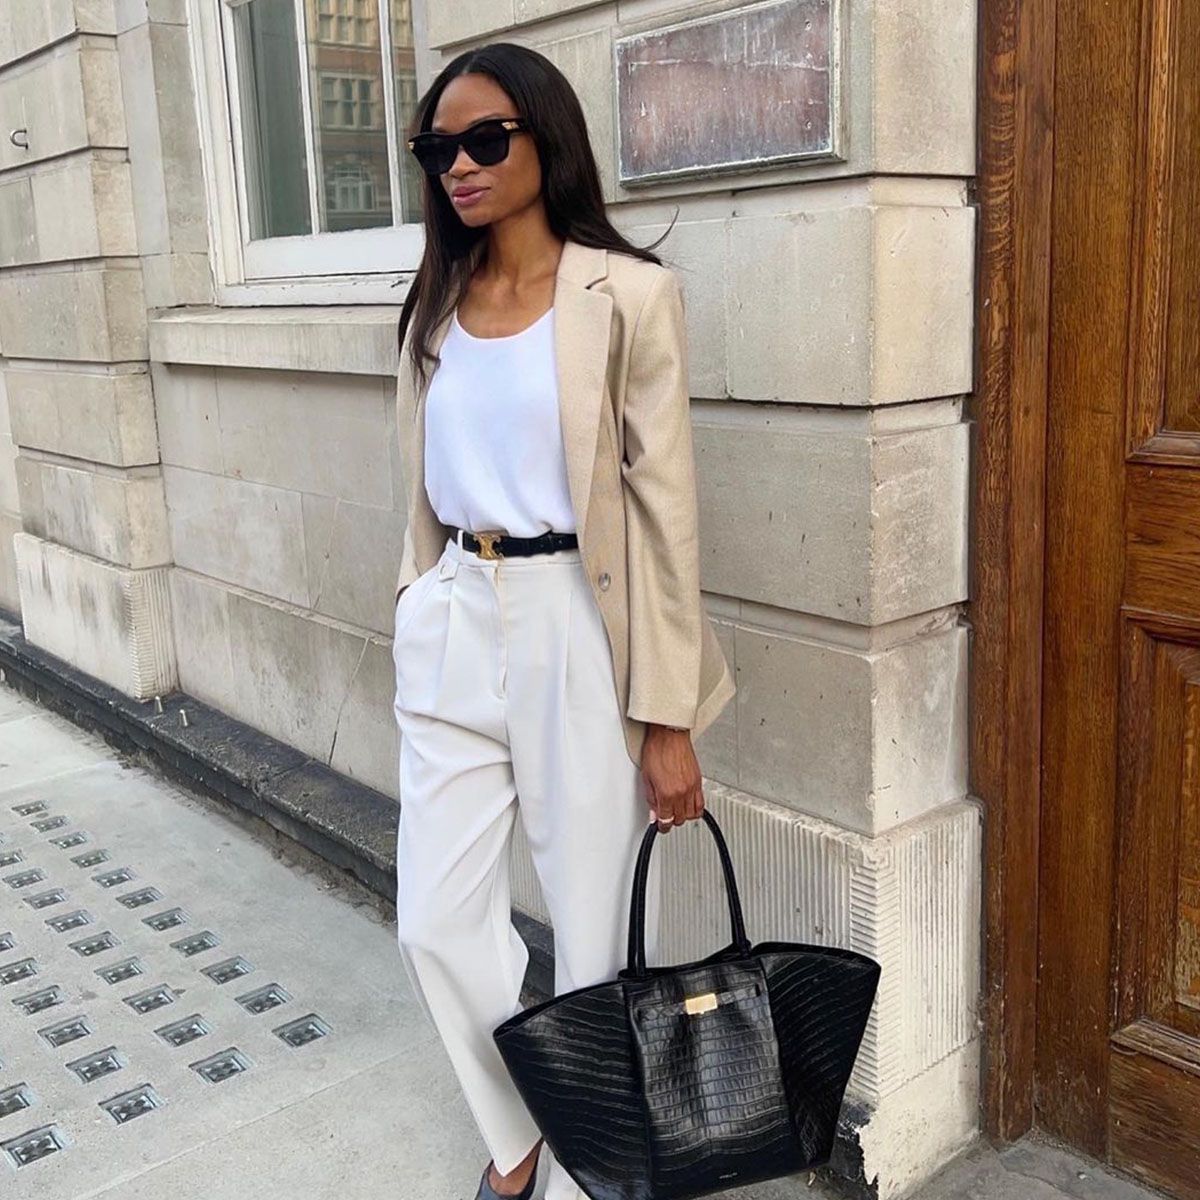 The perfect casual summer outfit: head into summer with style and grace